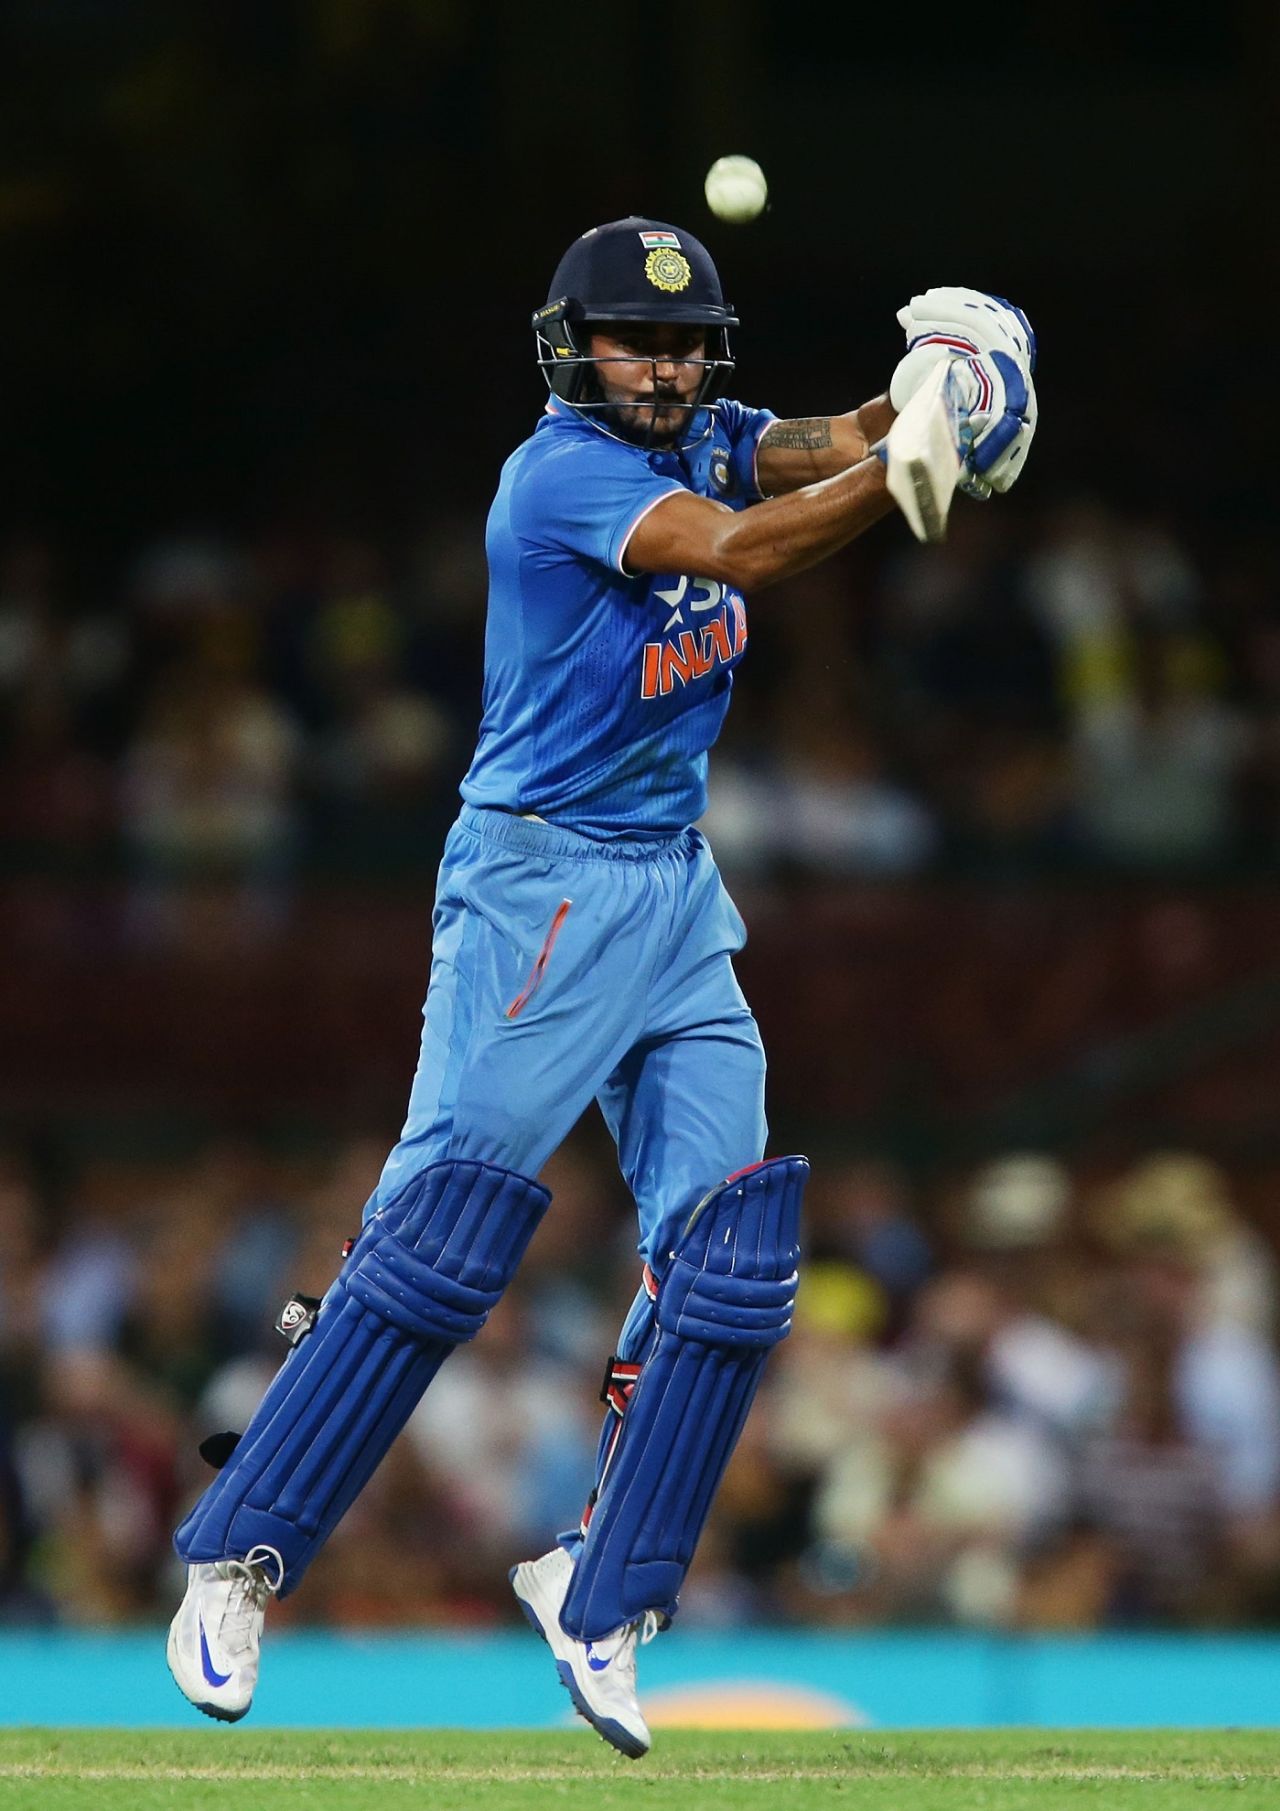 Manish Pandey plays a shot to the off side on his way to a century, Sydney, January 23, 2016
